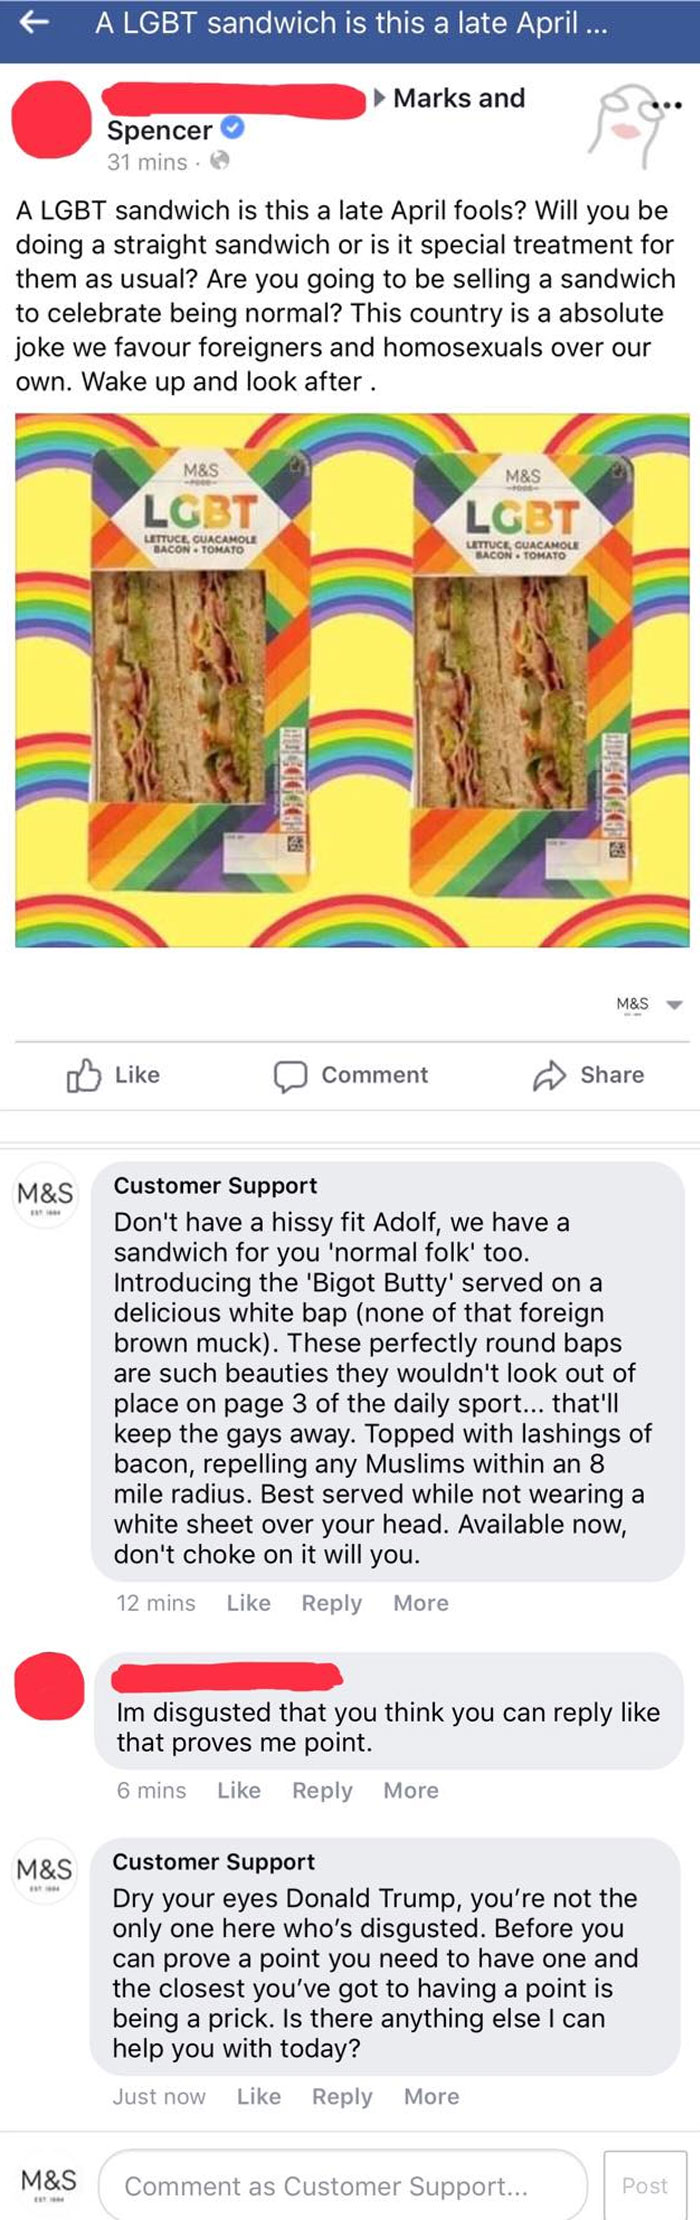 m&s lgbt sandwich customer service - A Lgbt sandwich is this a late April ... Marks and Spencer 31 mins. A Lgbt sandwich is this a late April fools? Will you be doing a straight sandwich or is it special treatment for them as usual? Are you going to be se